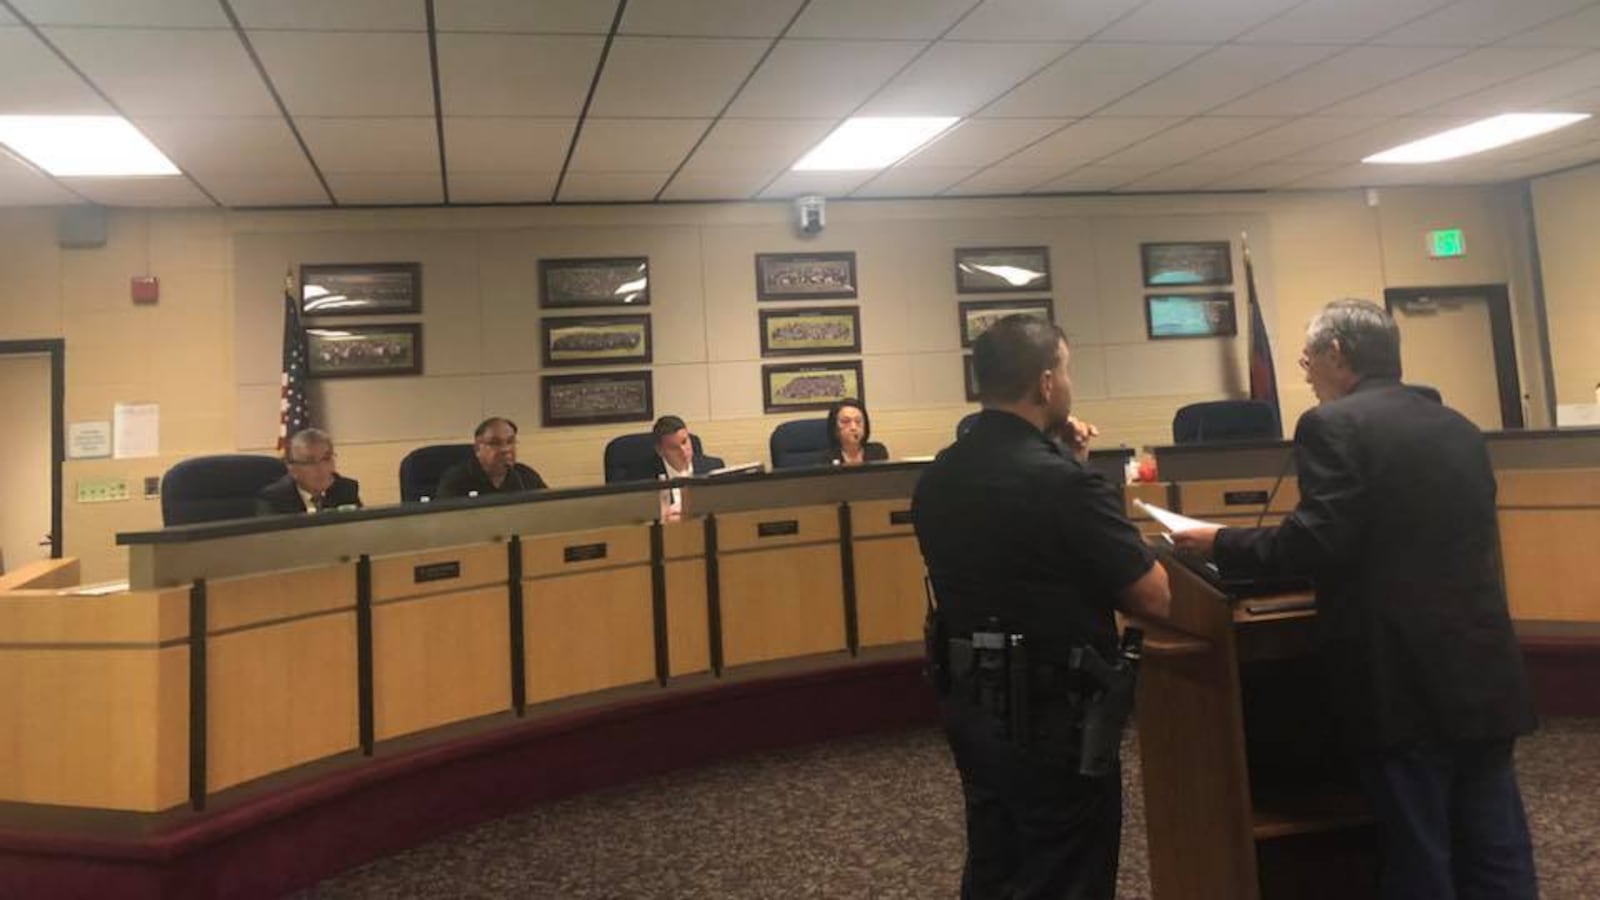 Jorge Garcia addressing the Adams 14 board just before he was escorted out. (Photo courtesy of Nicholas Martinez, founder of Transform Education Now.)